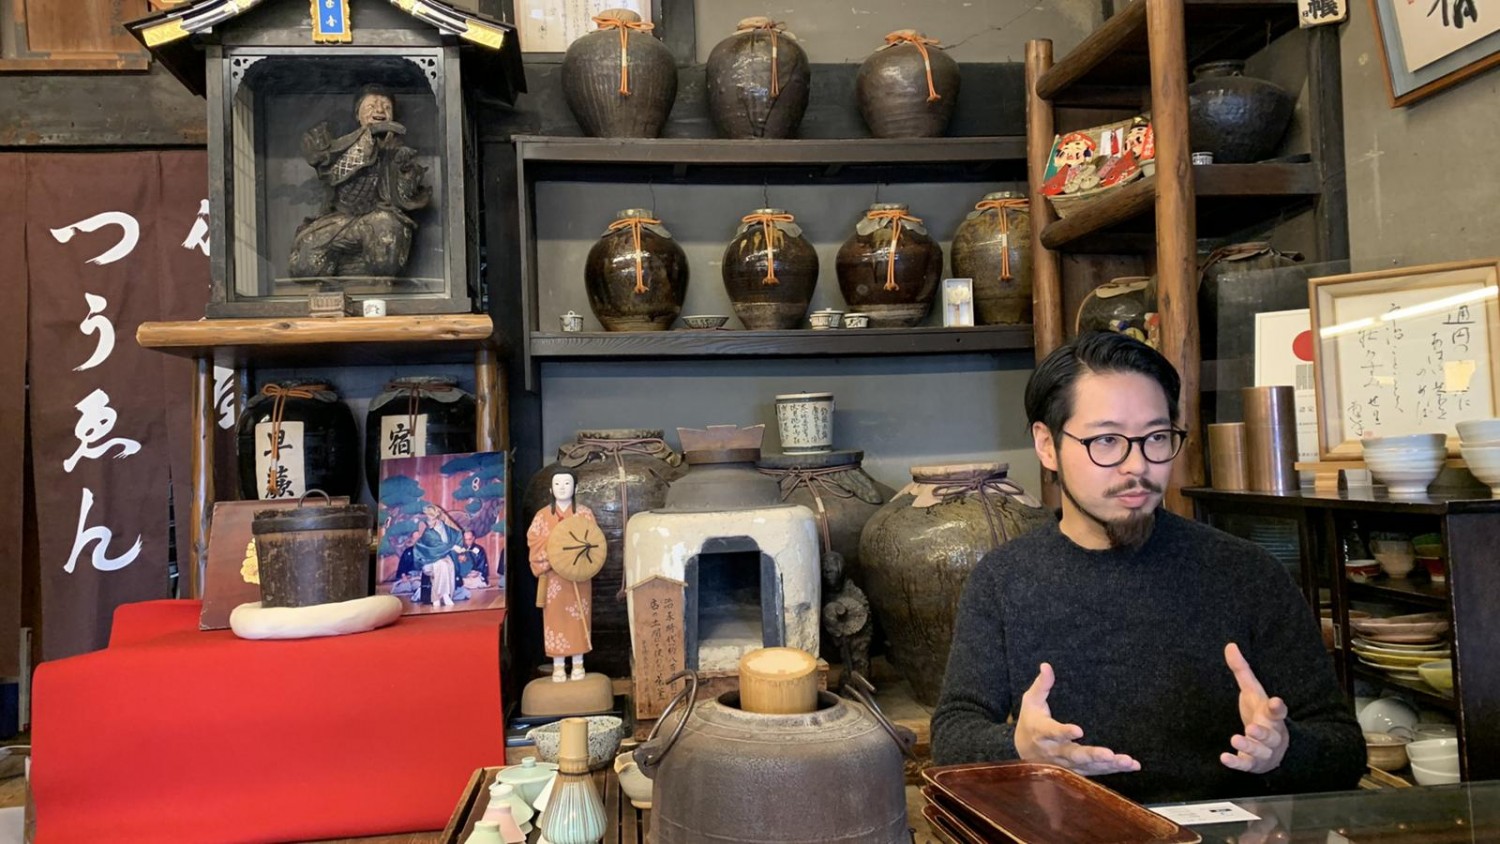 Yusuke Tsuen, 38, is the proprietor of Kyoto's Tsuen Tea, a tea house nearing 900 years old. He says picking up the family business was a no-brainer to him (Credit: Bryan Lufkin)